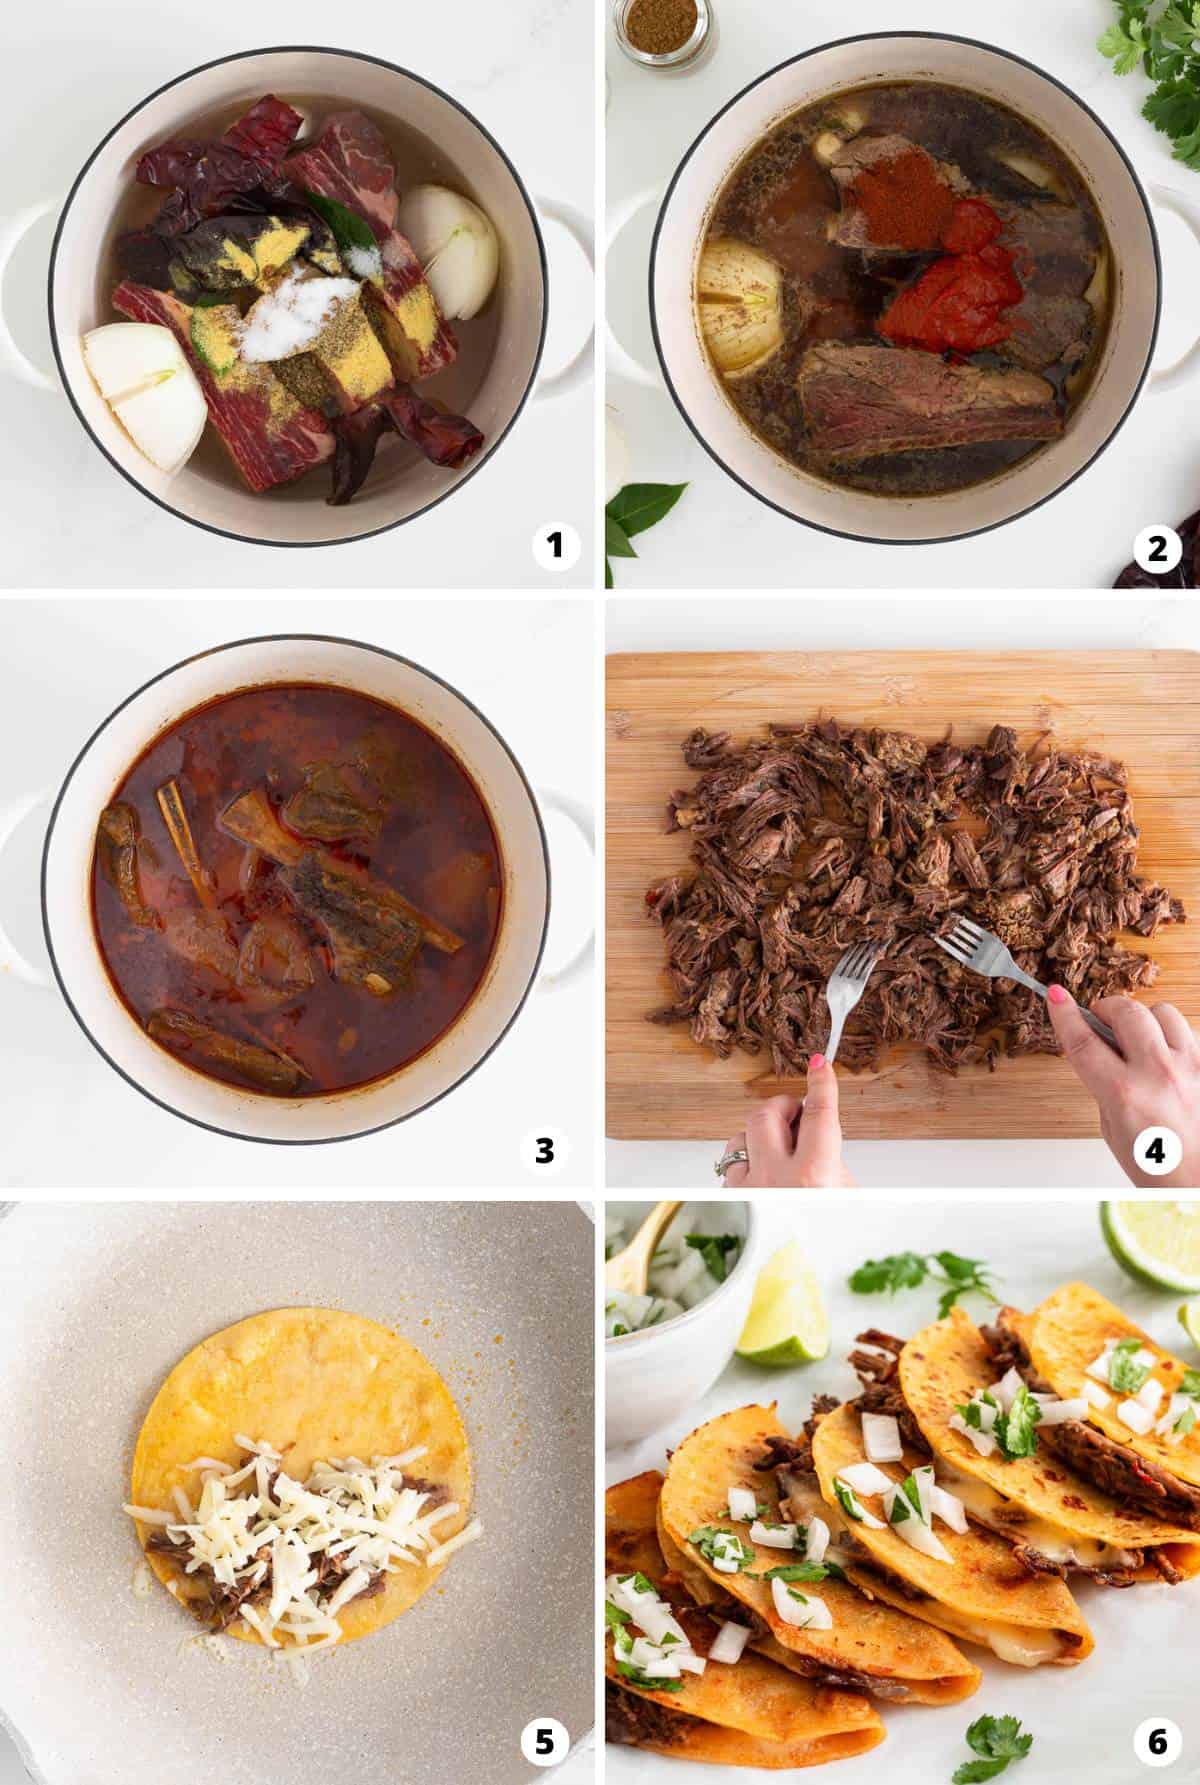 Showing how to make birria tacos in a 6 step collage.